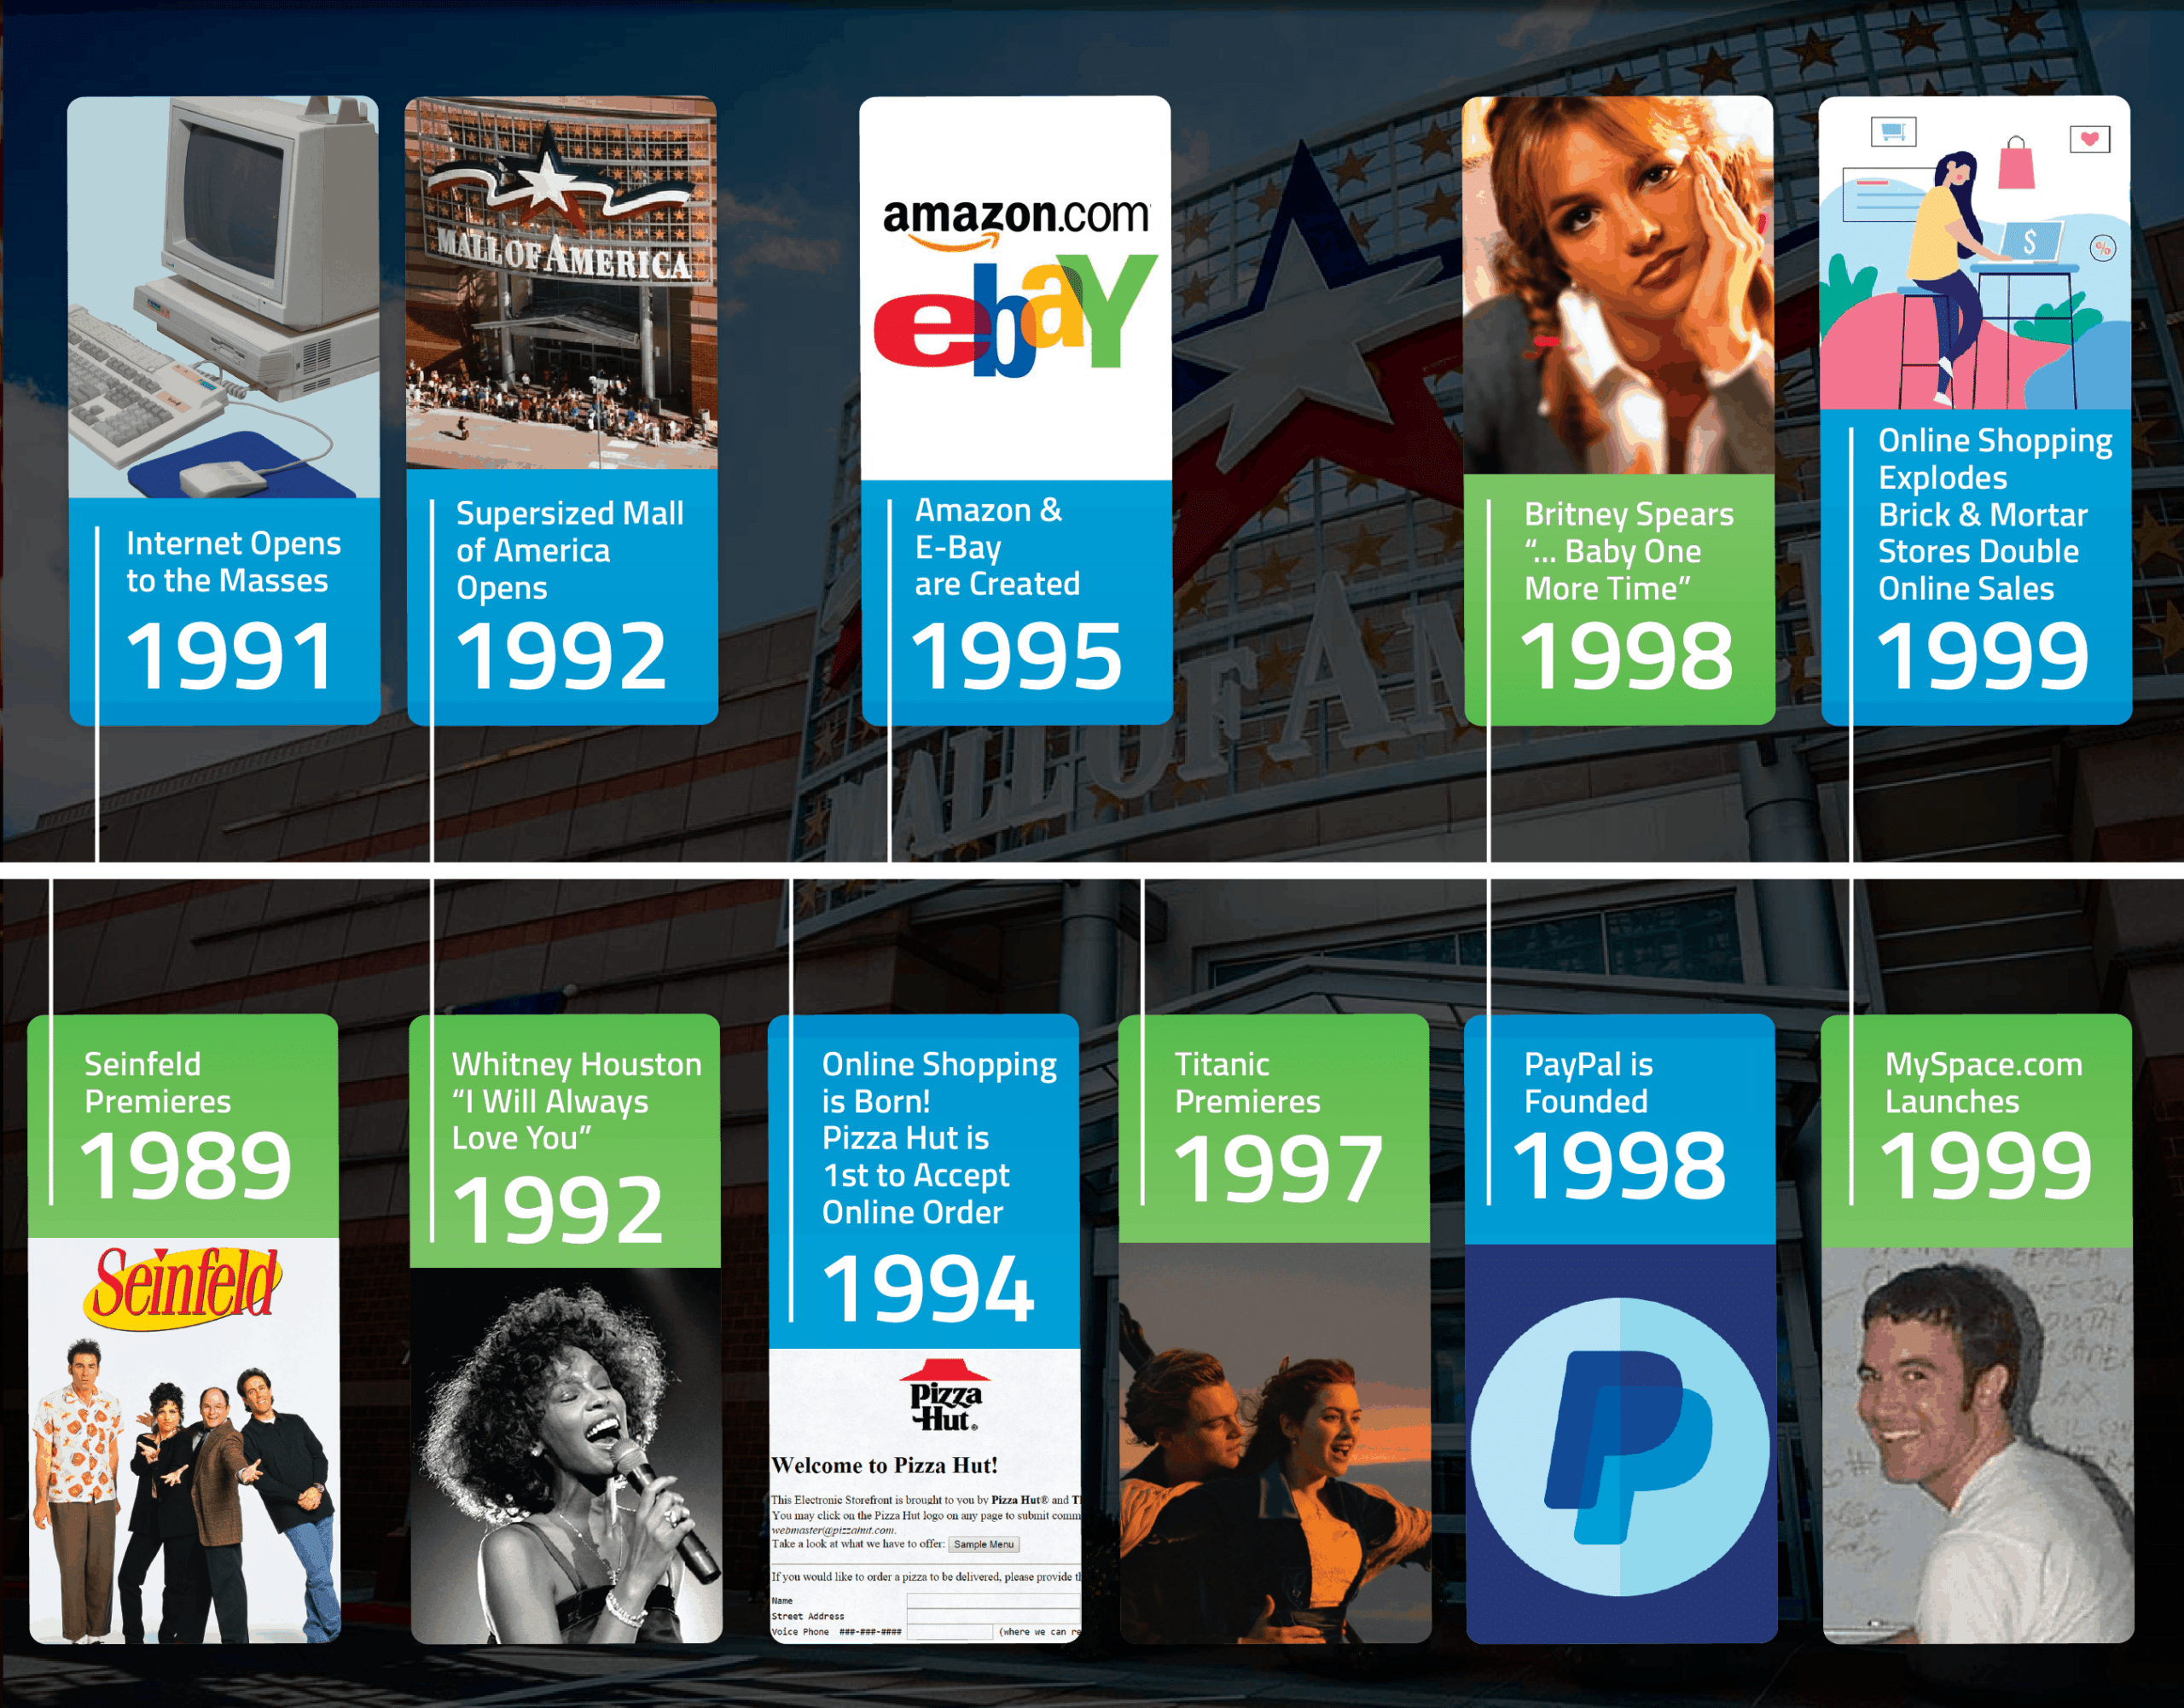 A timeline of retail evolution over the years from 1991 to 1999